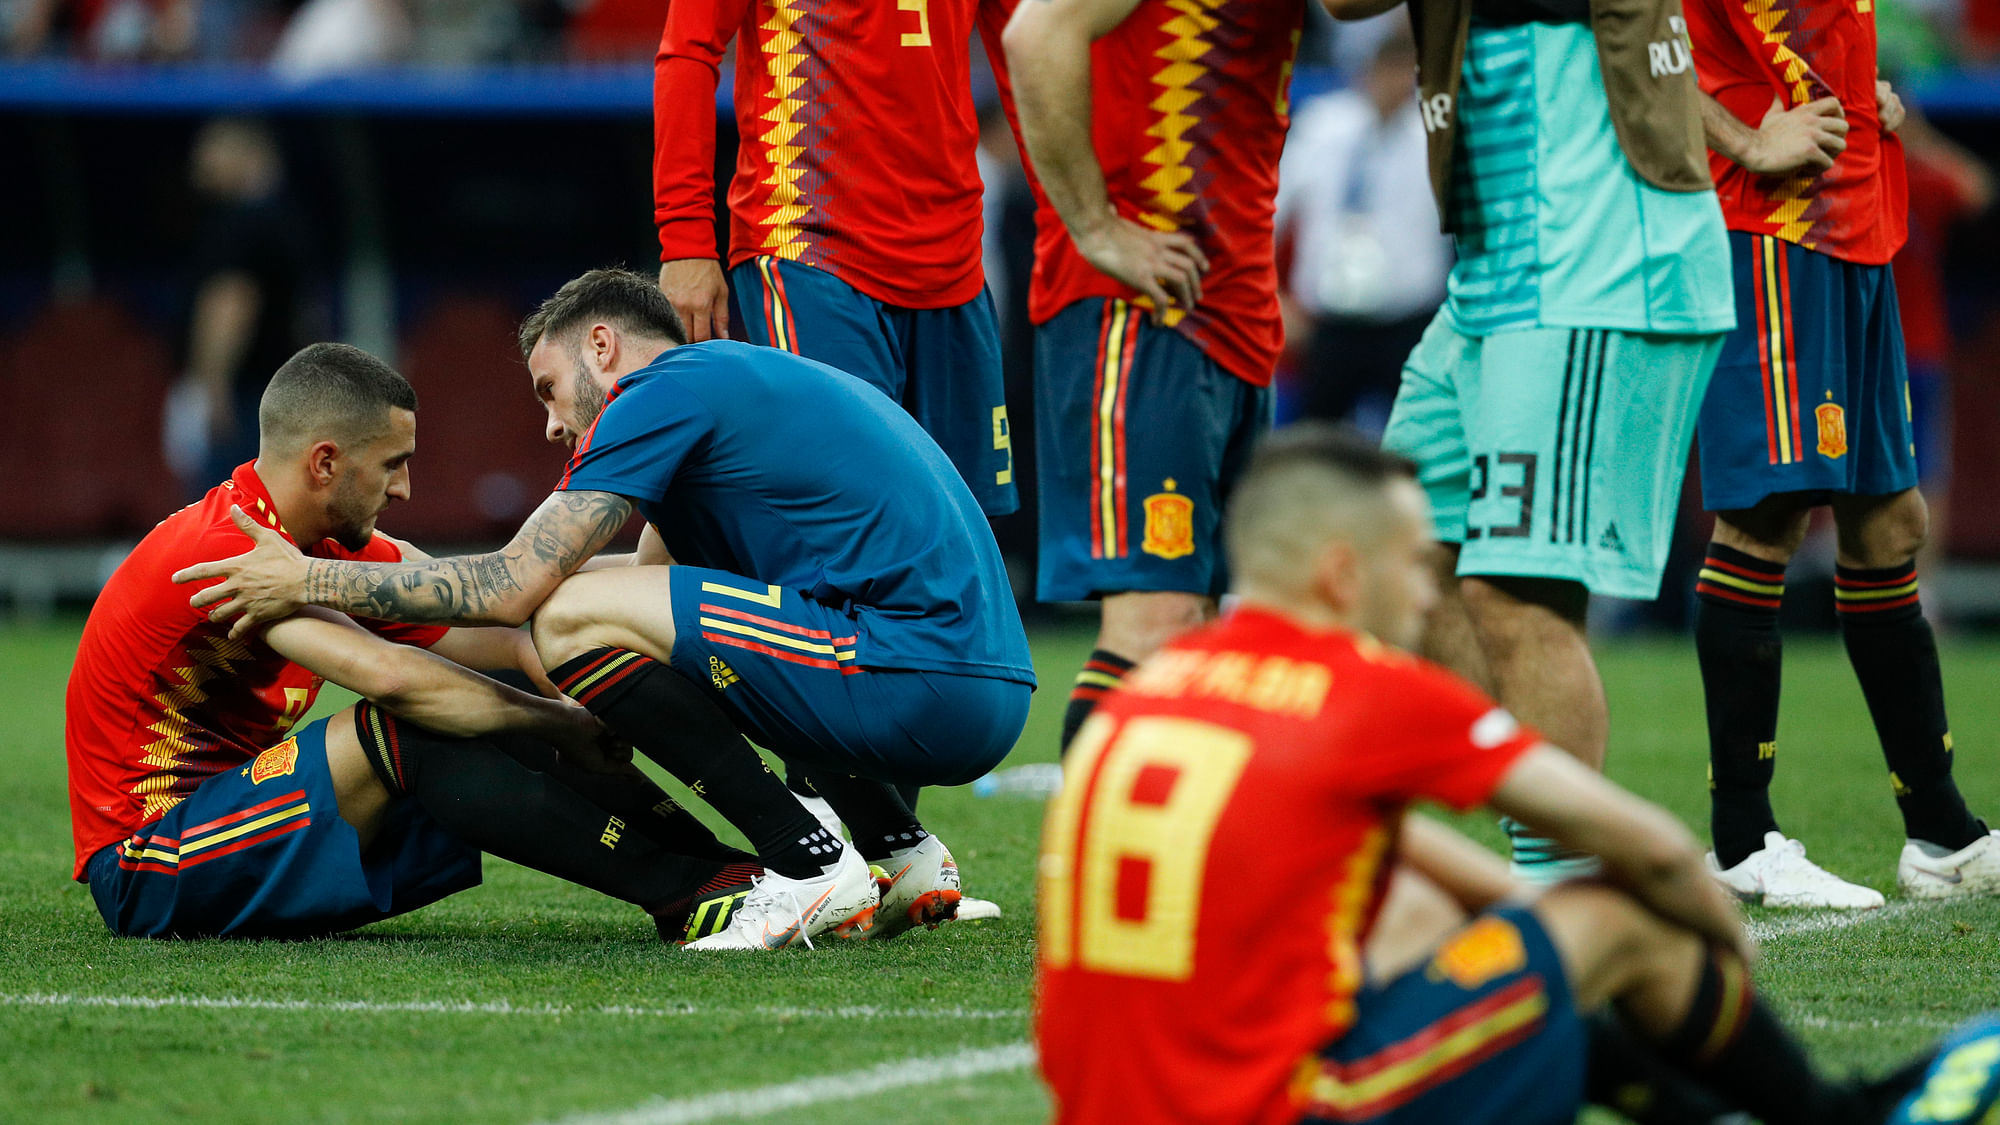 Spain’s dejected stars will now look to rebuild, after an older generation - including Andres Iniesta - has disappointed at the World Cup